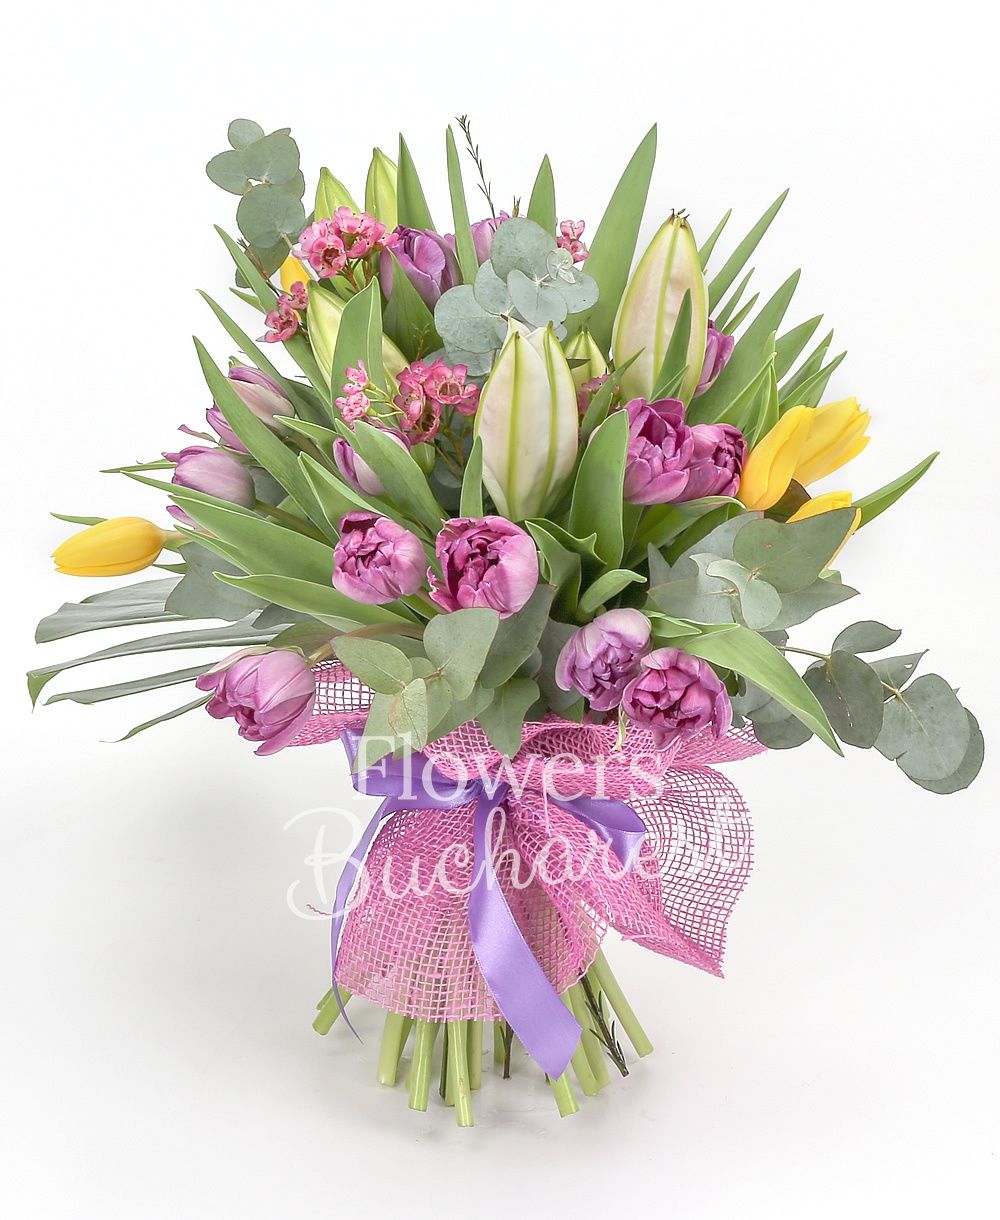 2 imperial pink lilies, 10 yellow tulips, 15 purple tulips, 2 pink waxflowers, greenery